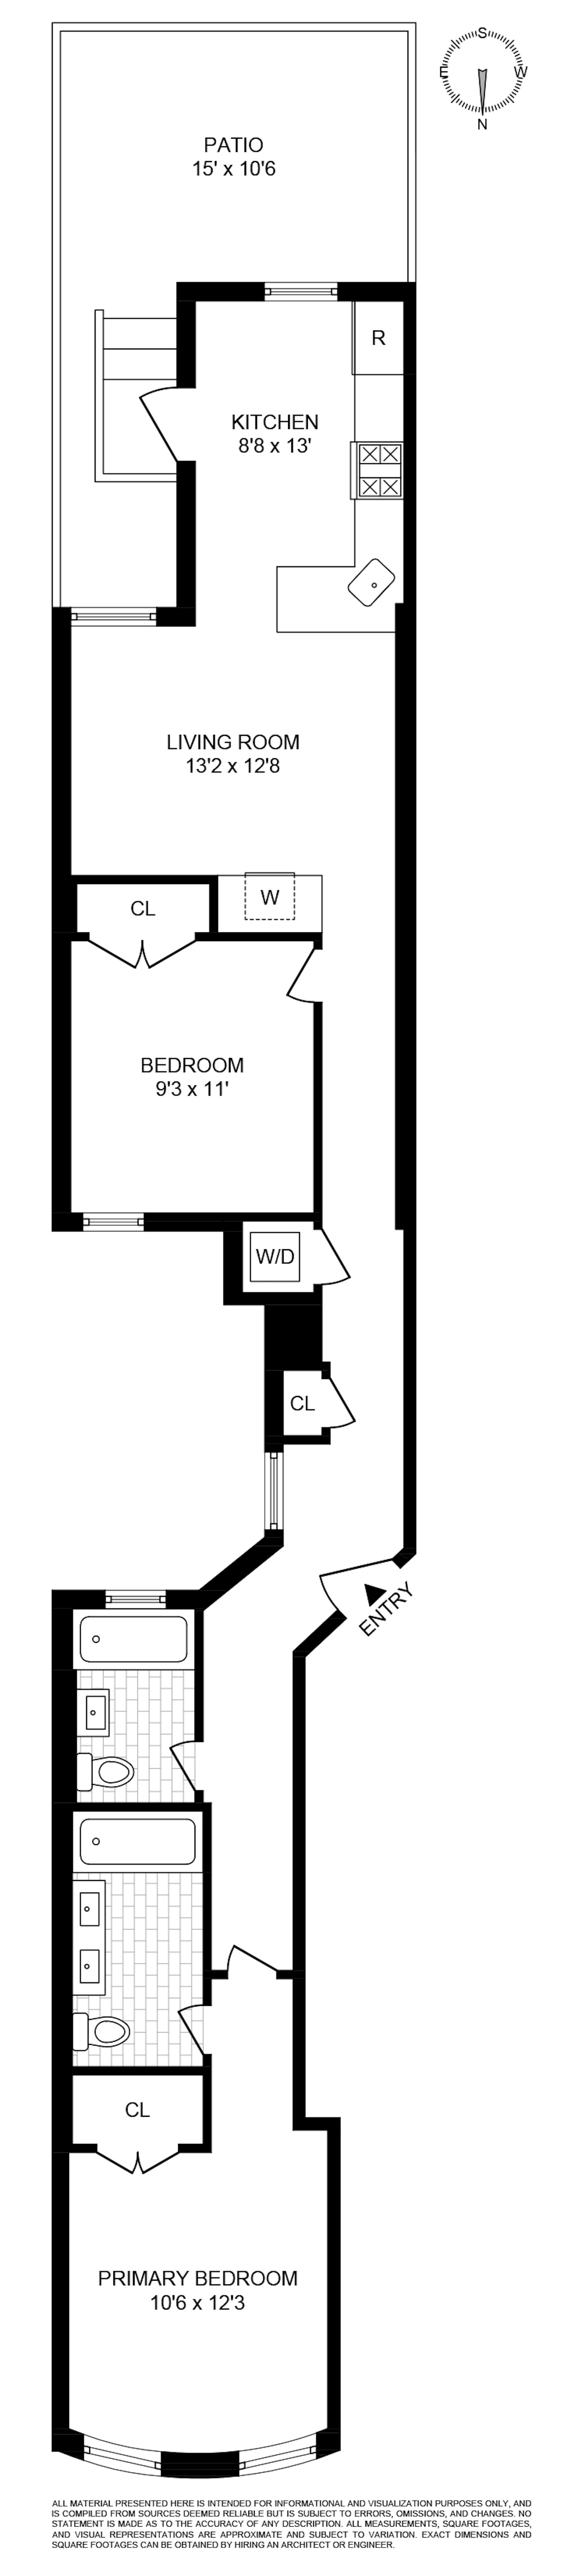 Floorplan for 790 St Johns Place, 1A